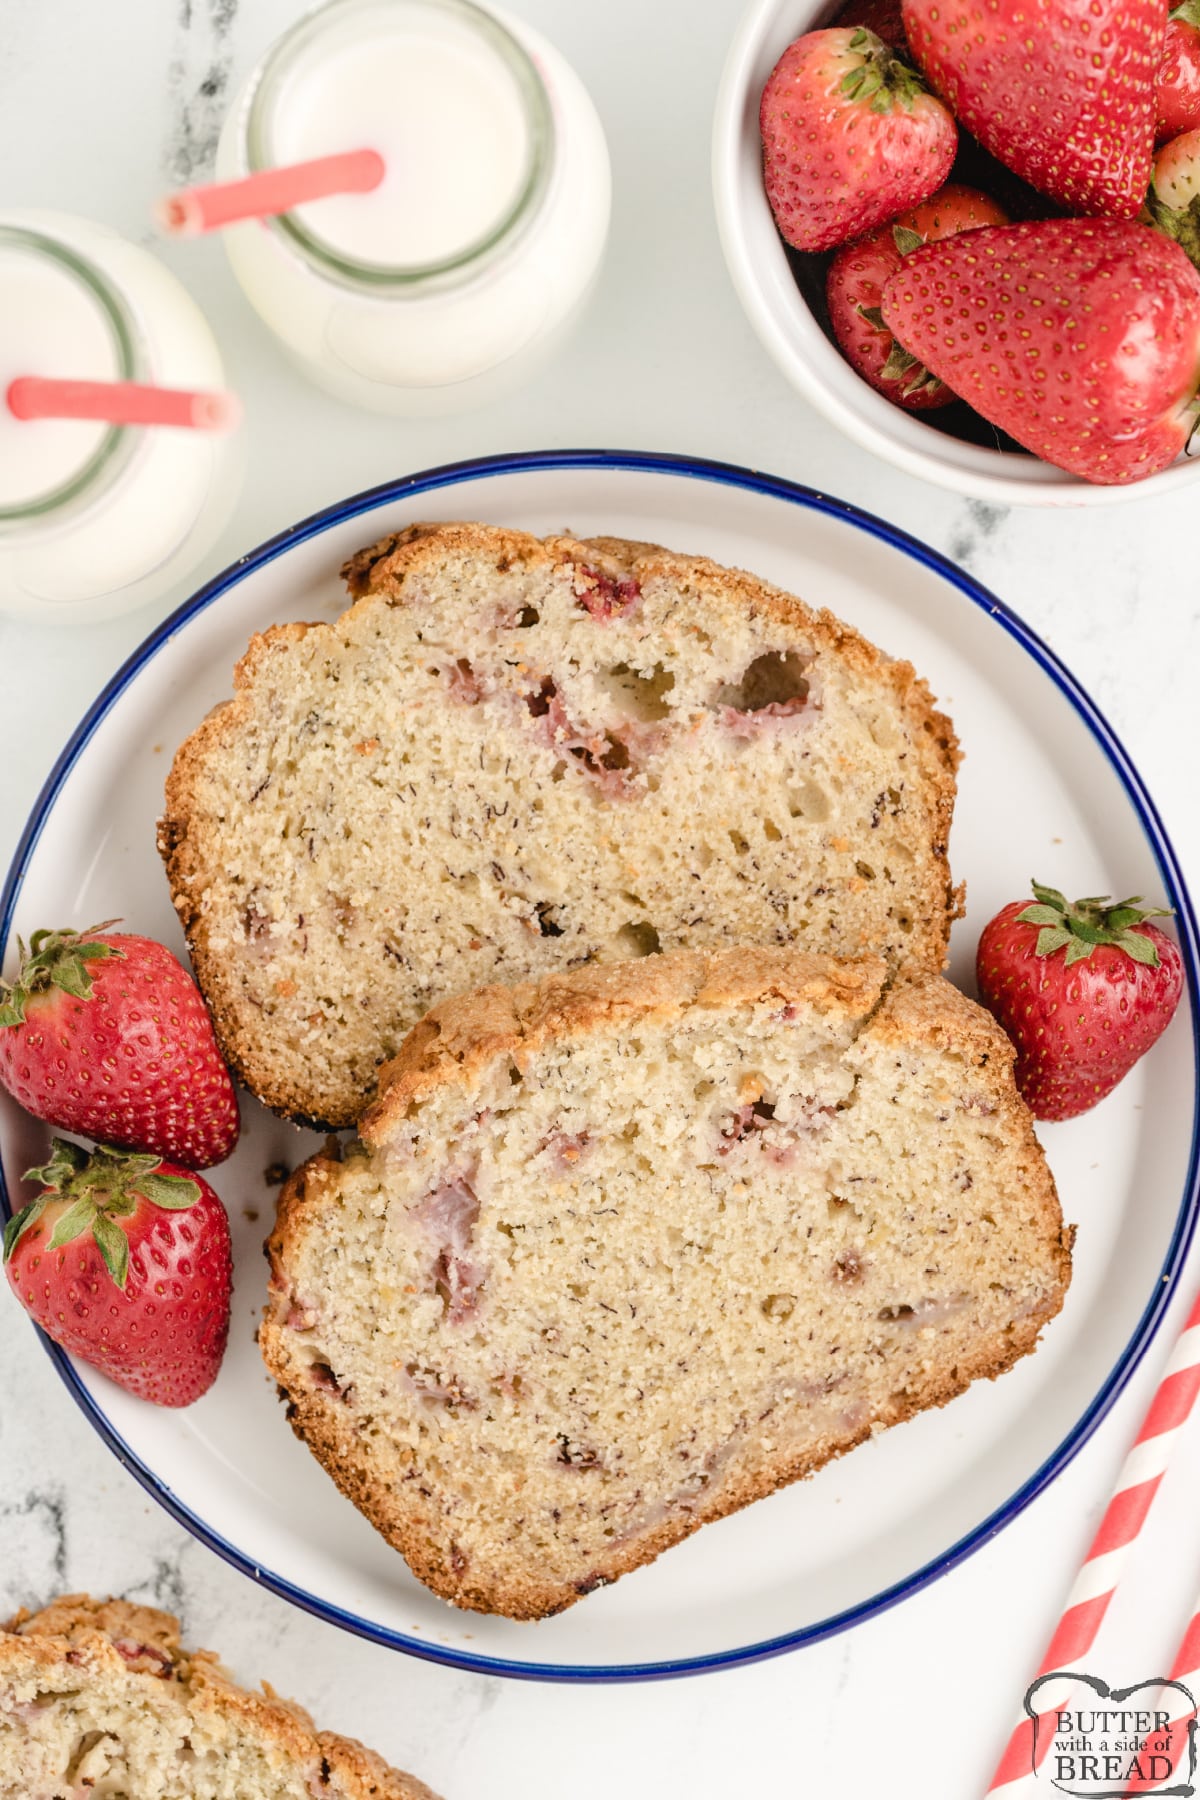 Strawberry Cream Cheese Banana Bread is a delicious and easy-to-make recipe that can be enjoyed as breakfast or dessert. The perfect banana bread recipe for using up those over-ripe bananas!